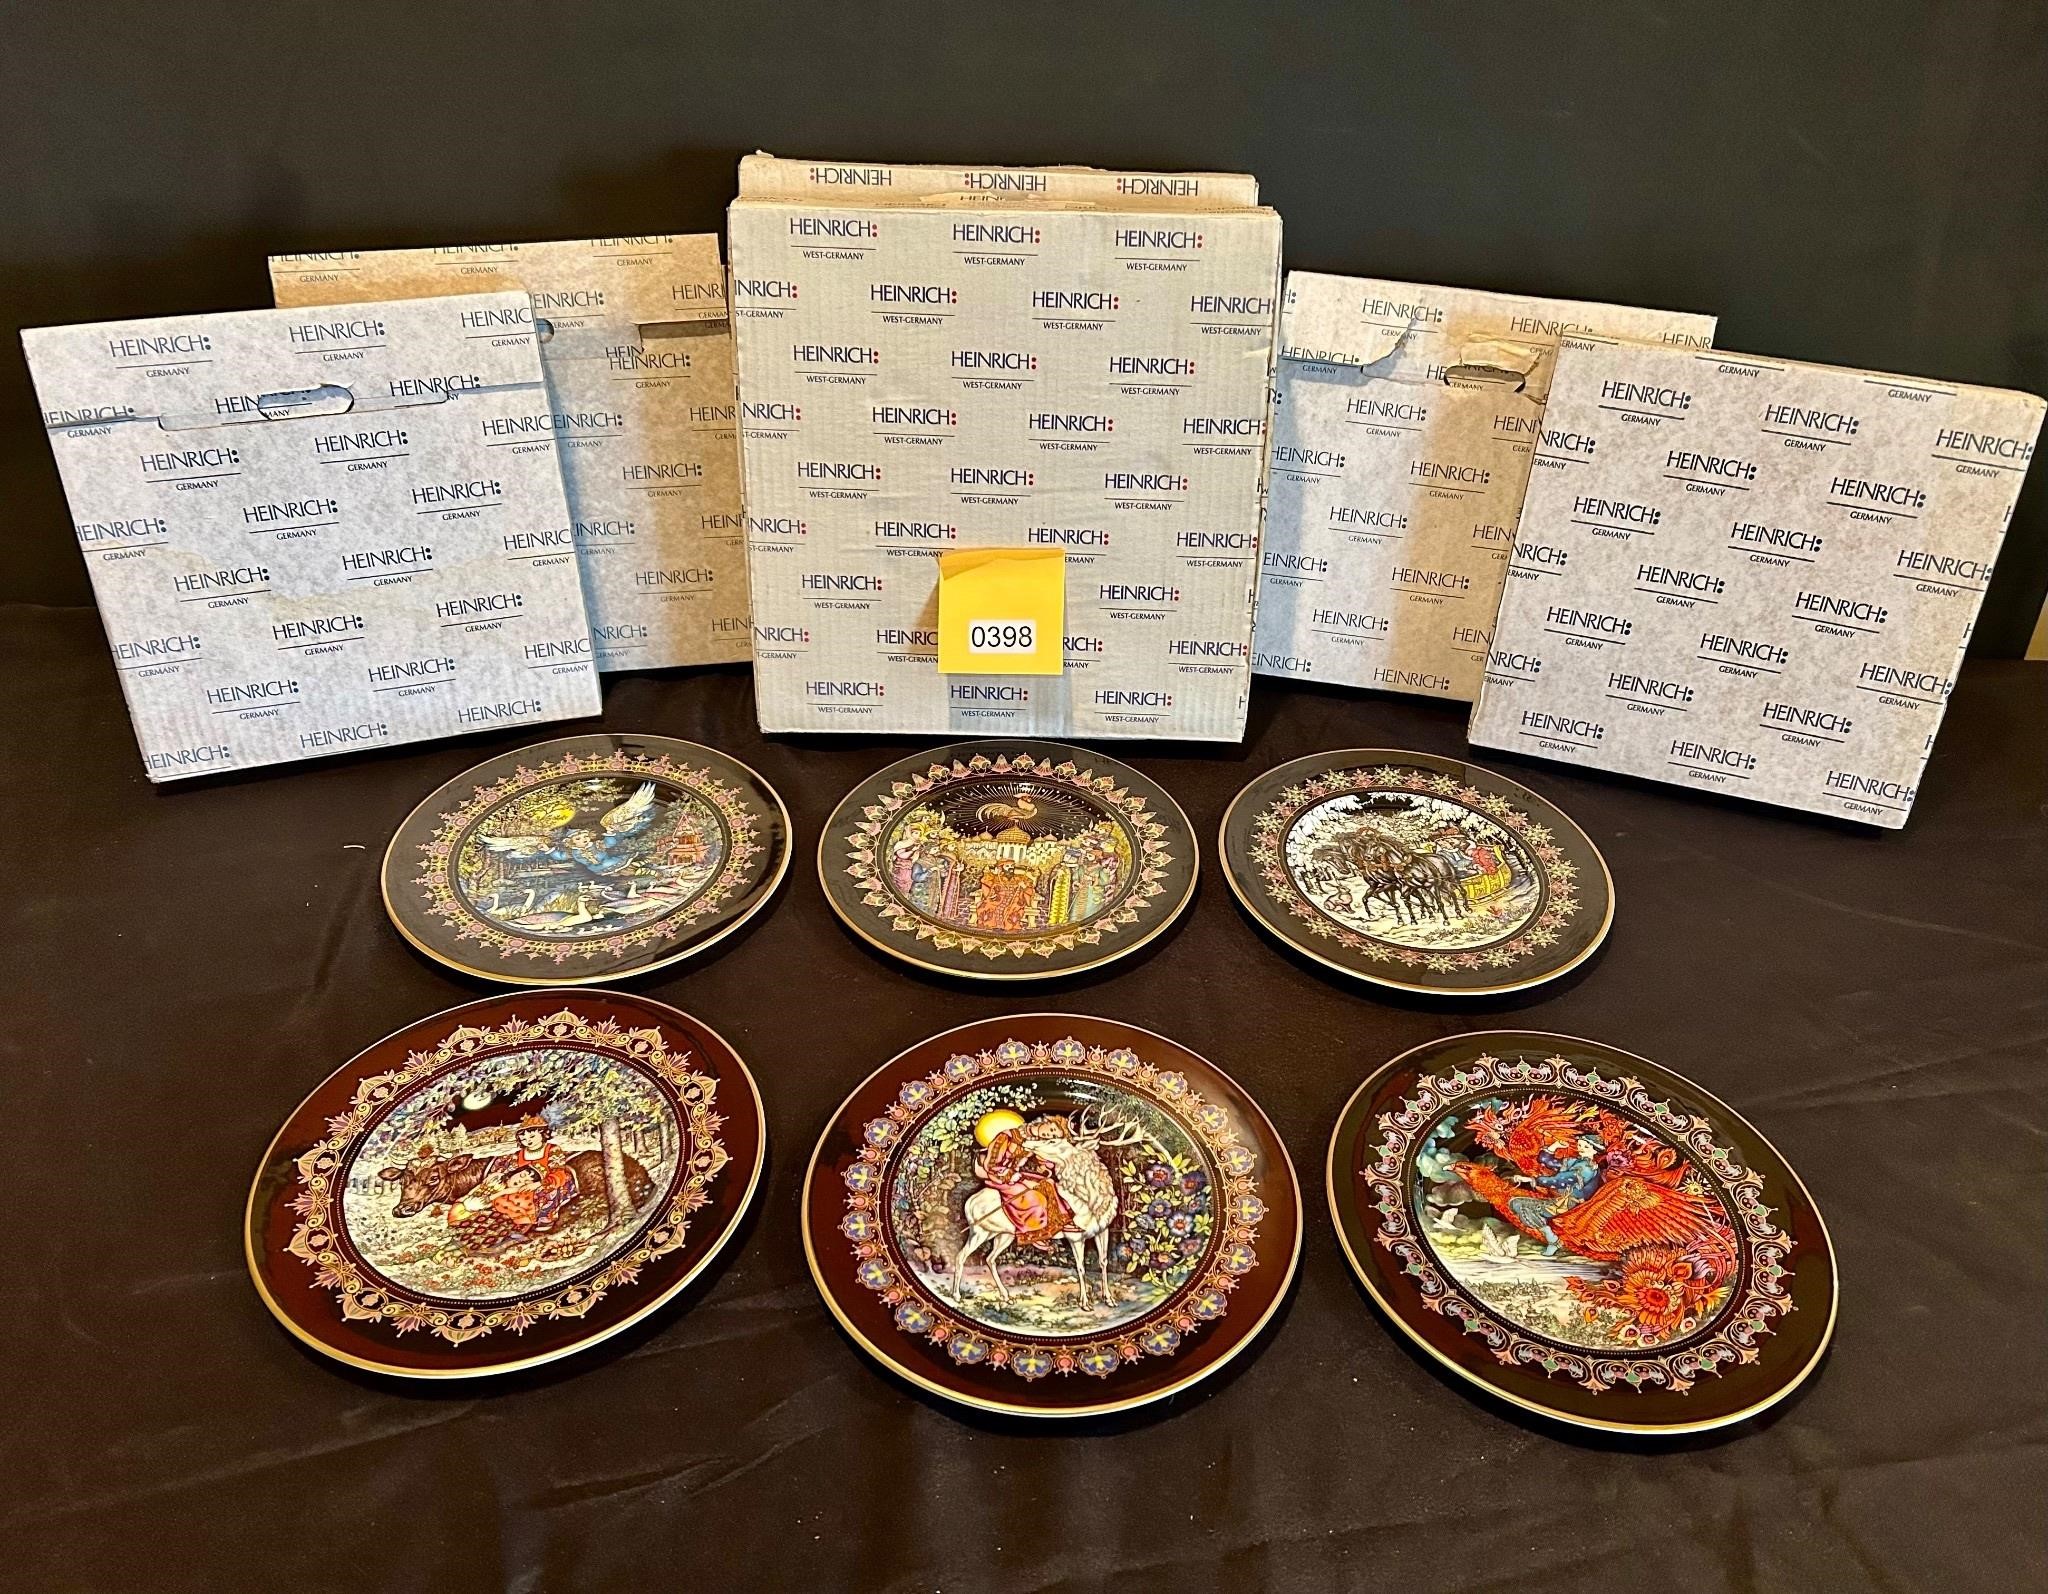 Russian Fairy Tale Collectible Plates